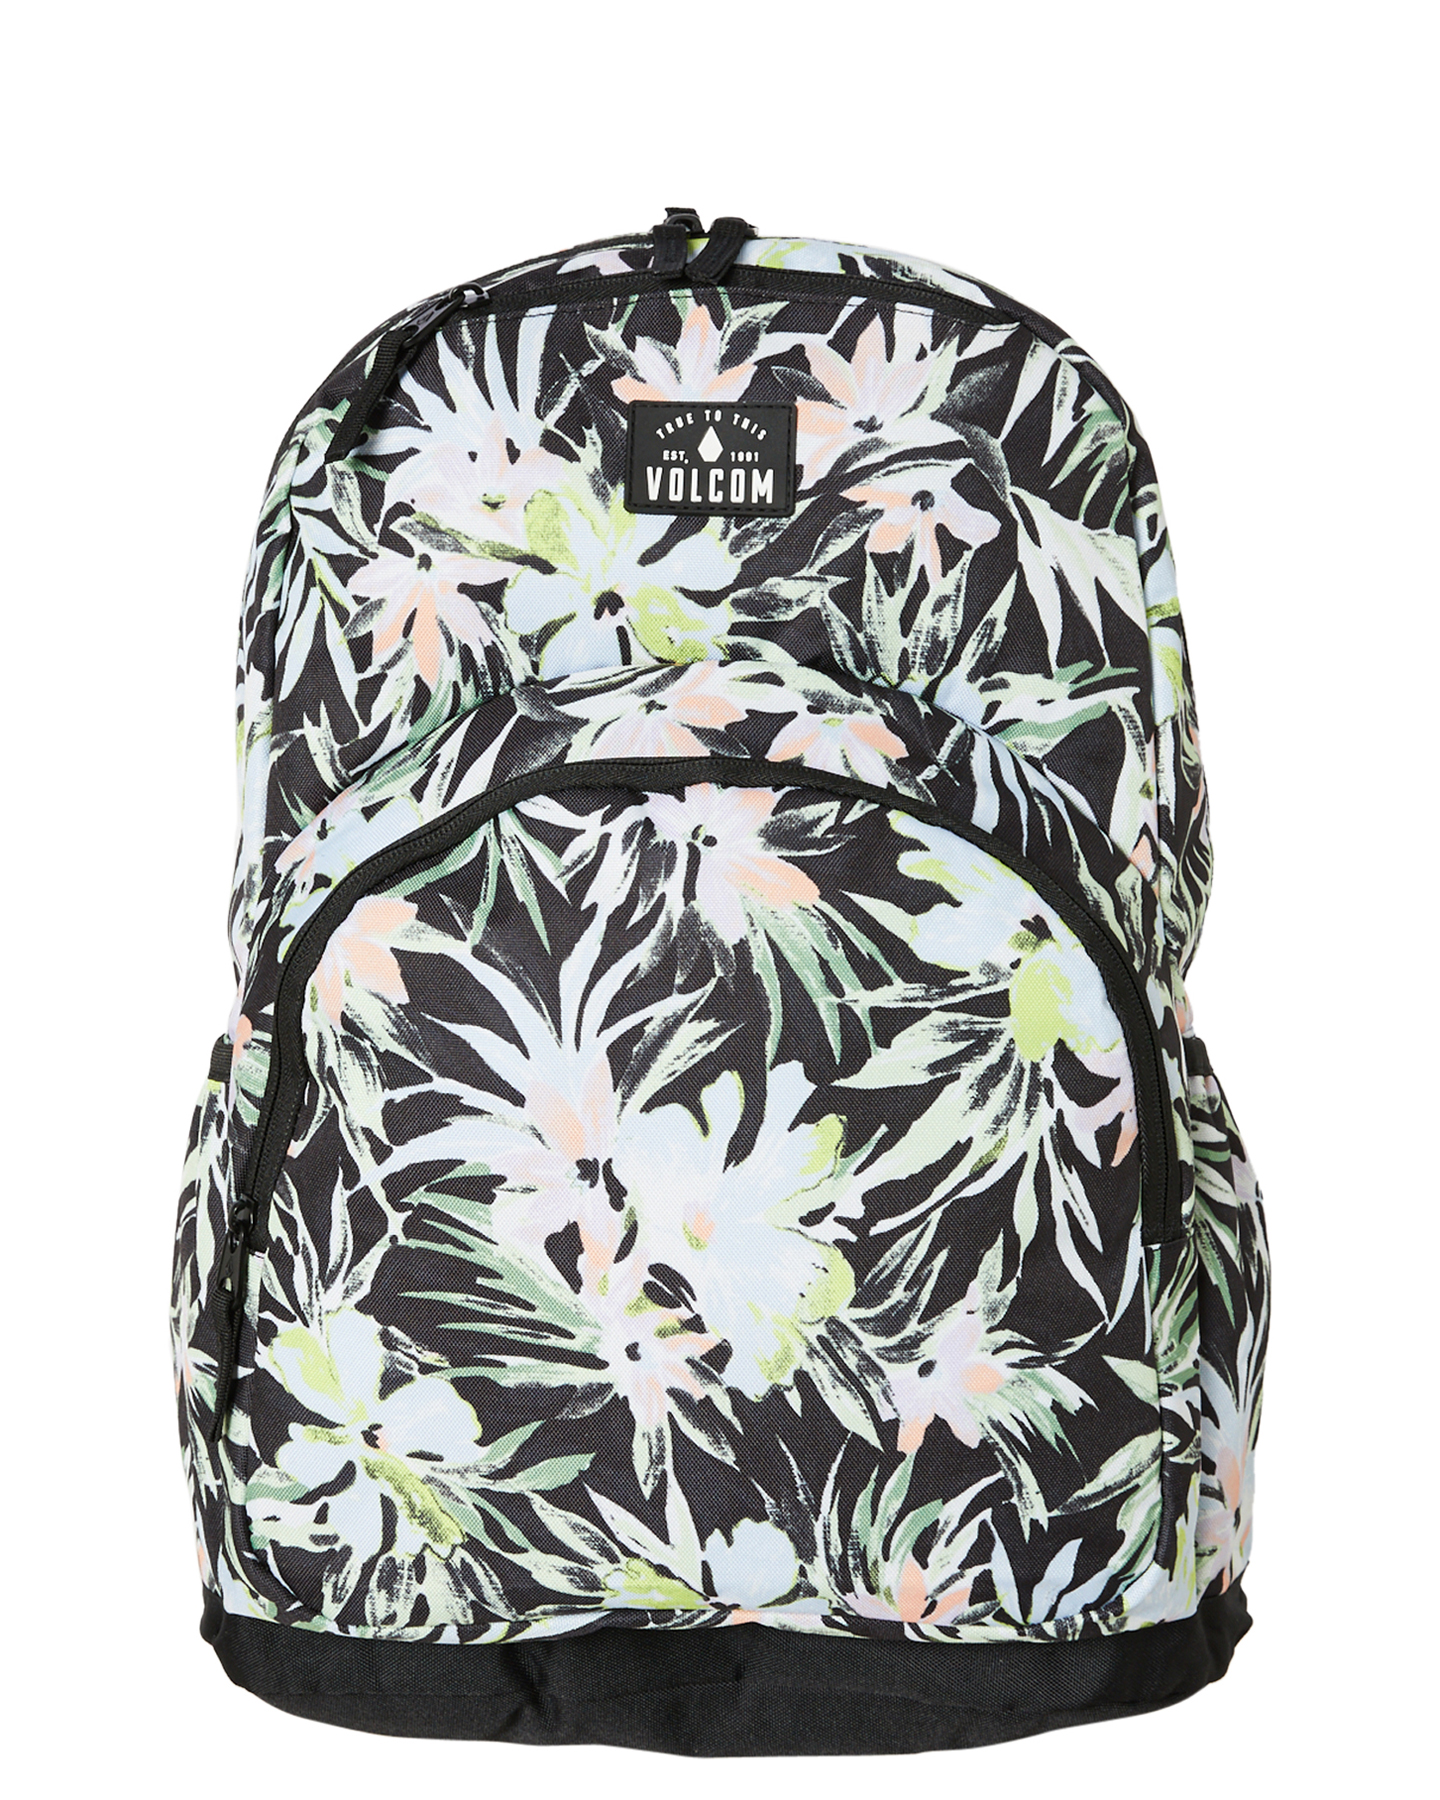 Volcom Patch Attack Backpack - Multi | SurfStitch